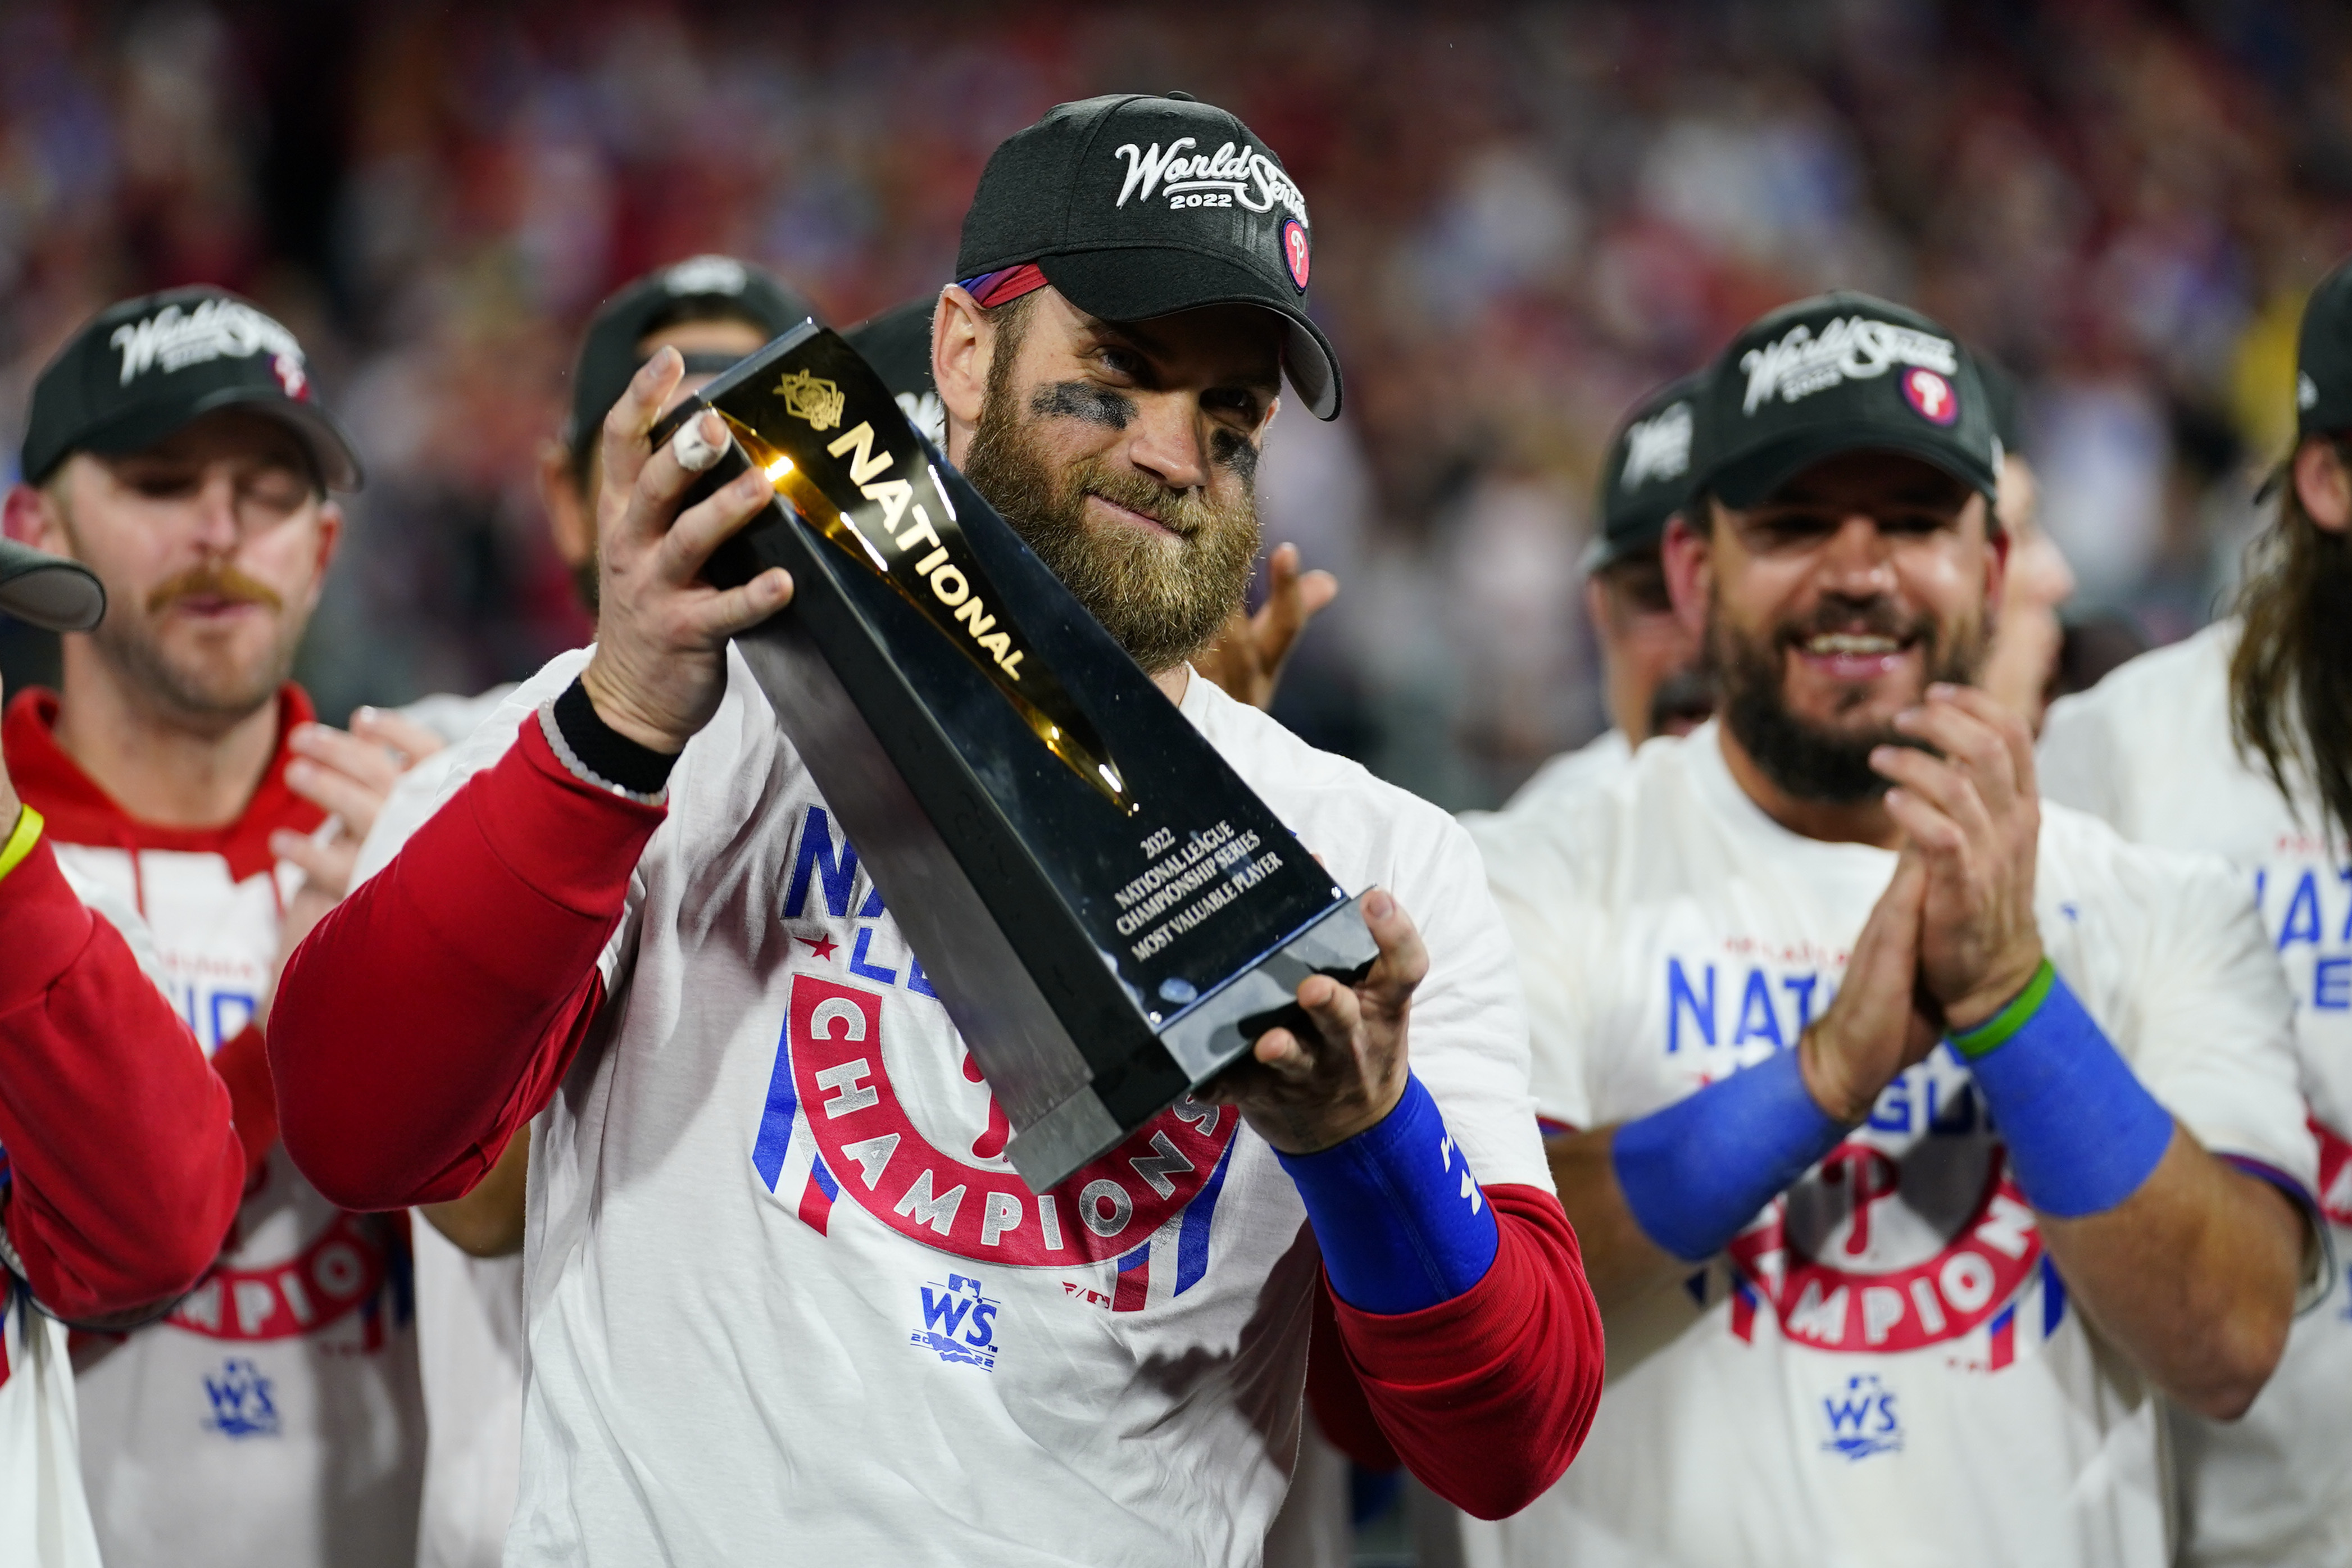 Bryce Harper's two-run, eighth-inning home run lifts Phillies over Padres  in Game 5 and into World Series - The Boston Globe